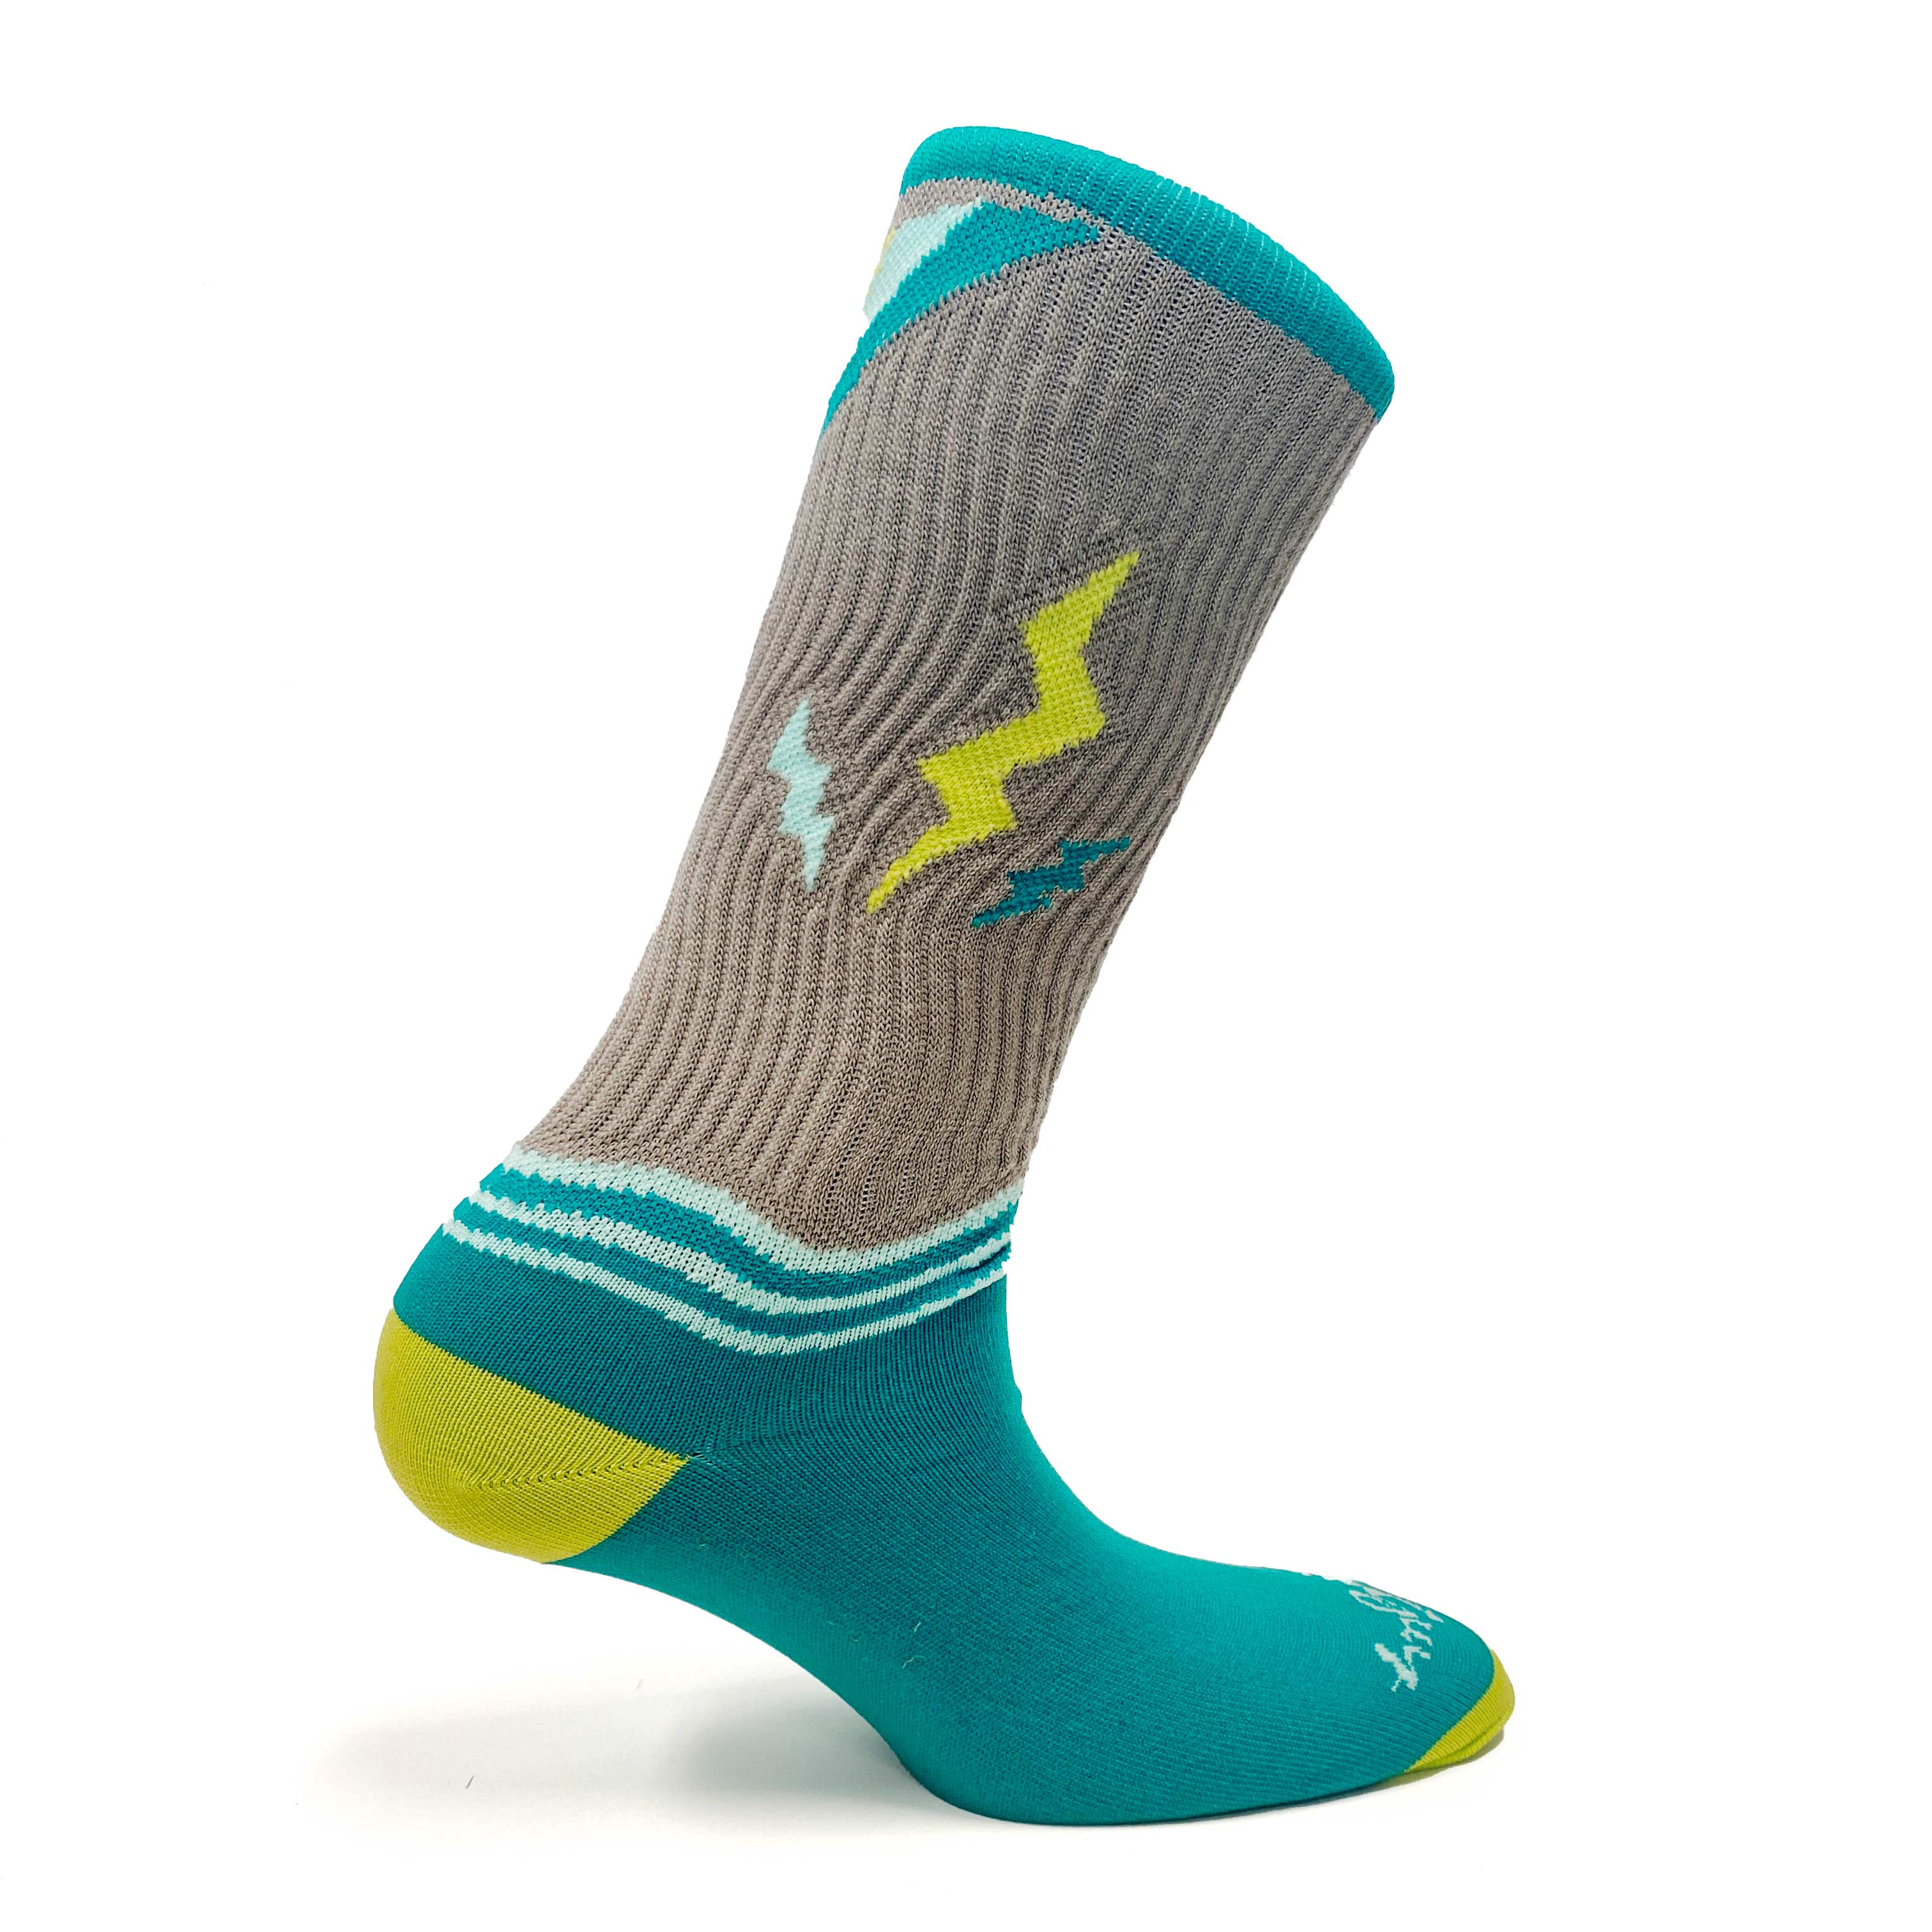 narwhal-sock-front-view-teal.jpg